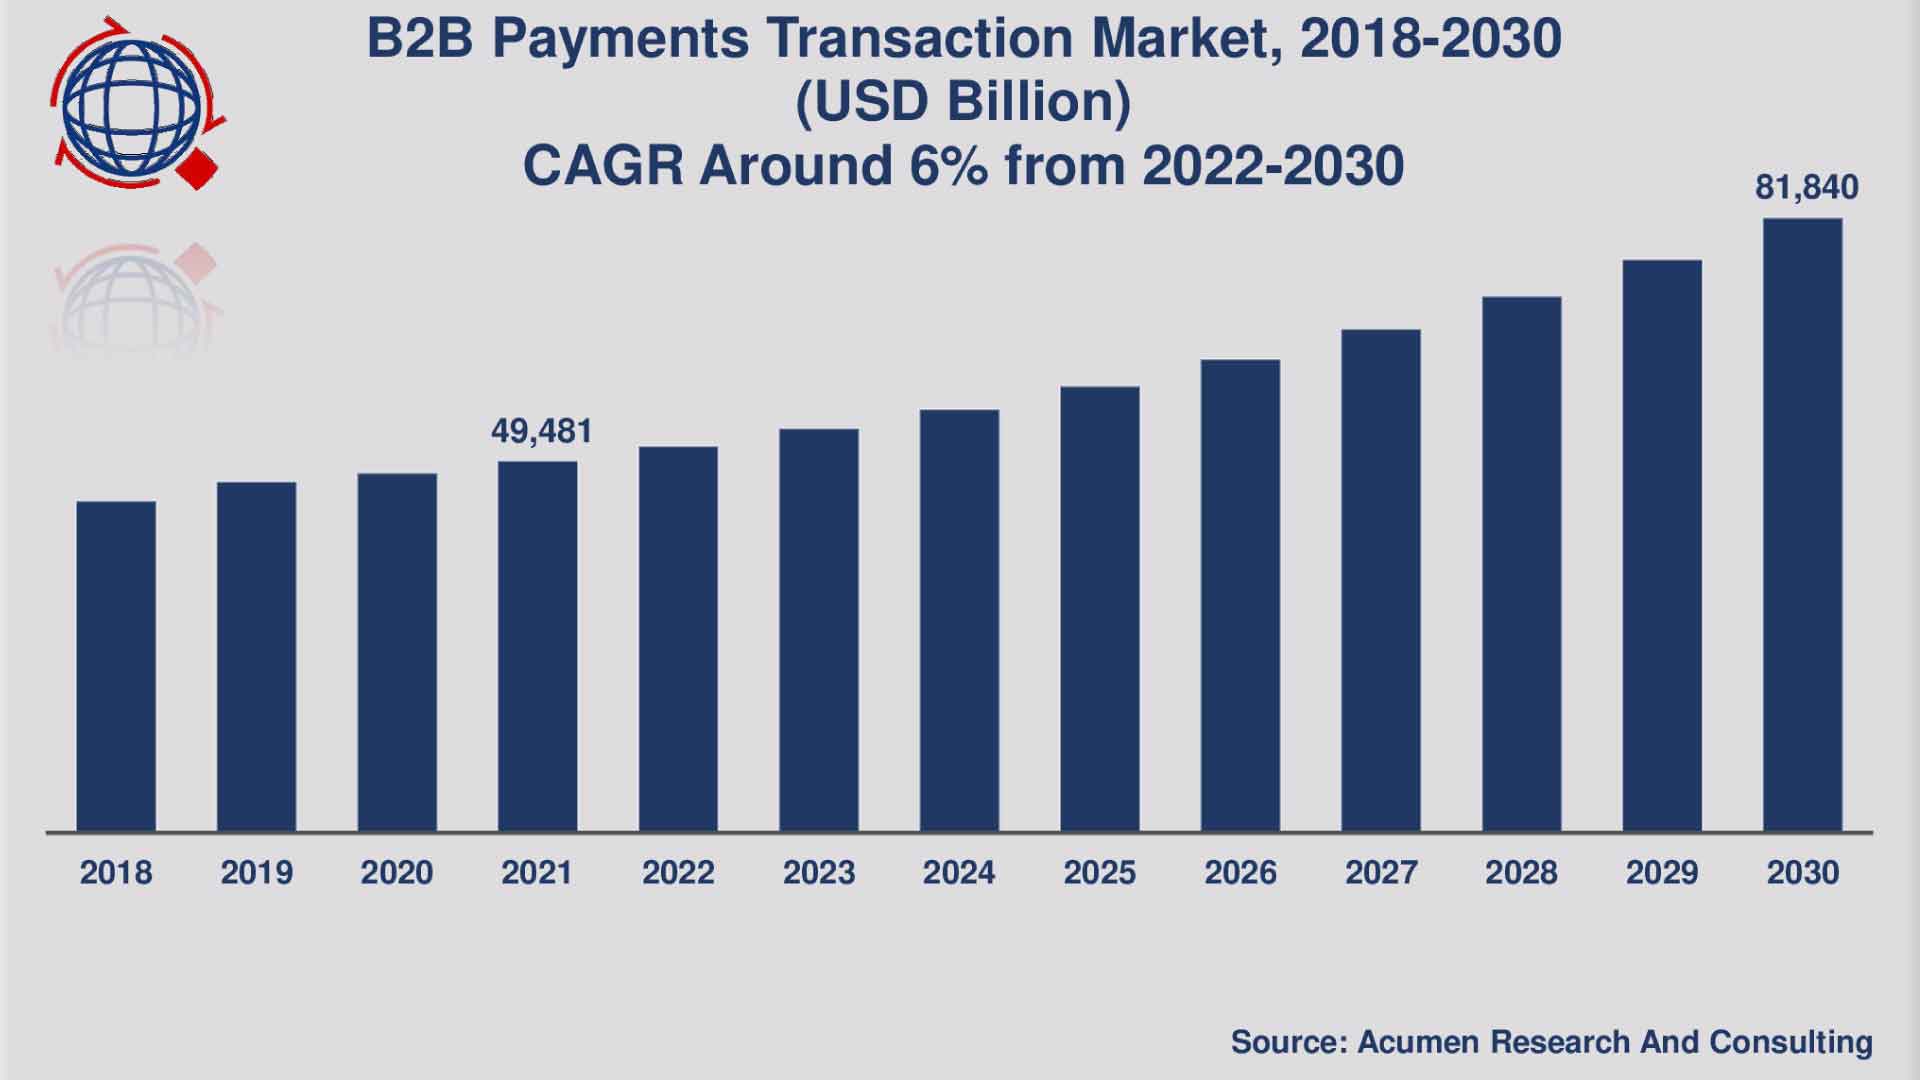 B2B Payment Transaction Market Size Will Attain USD 81,840 Billion by 2030 growing at 6% CAGR - Exclusive Report by Acumen Research and Consulting